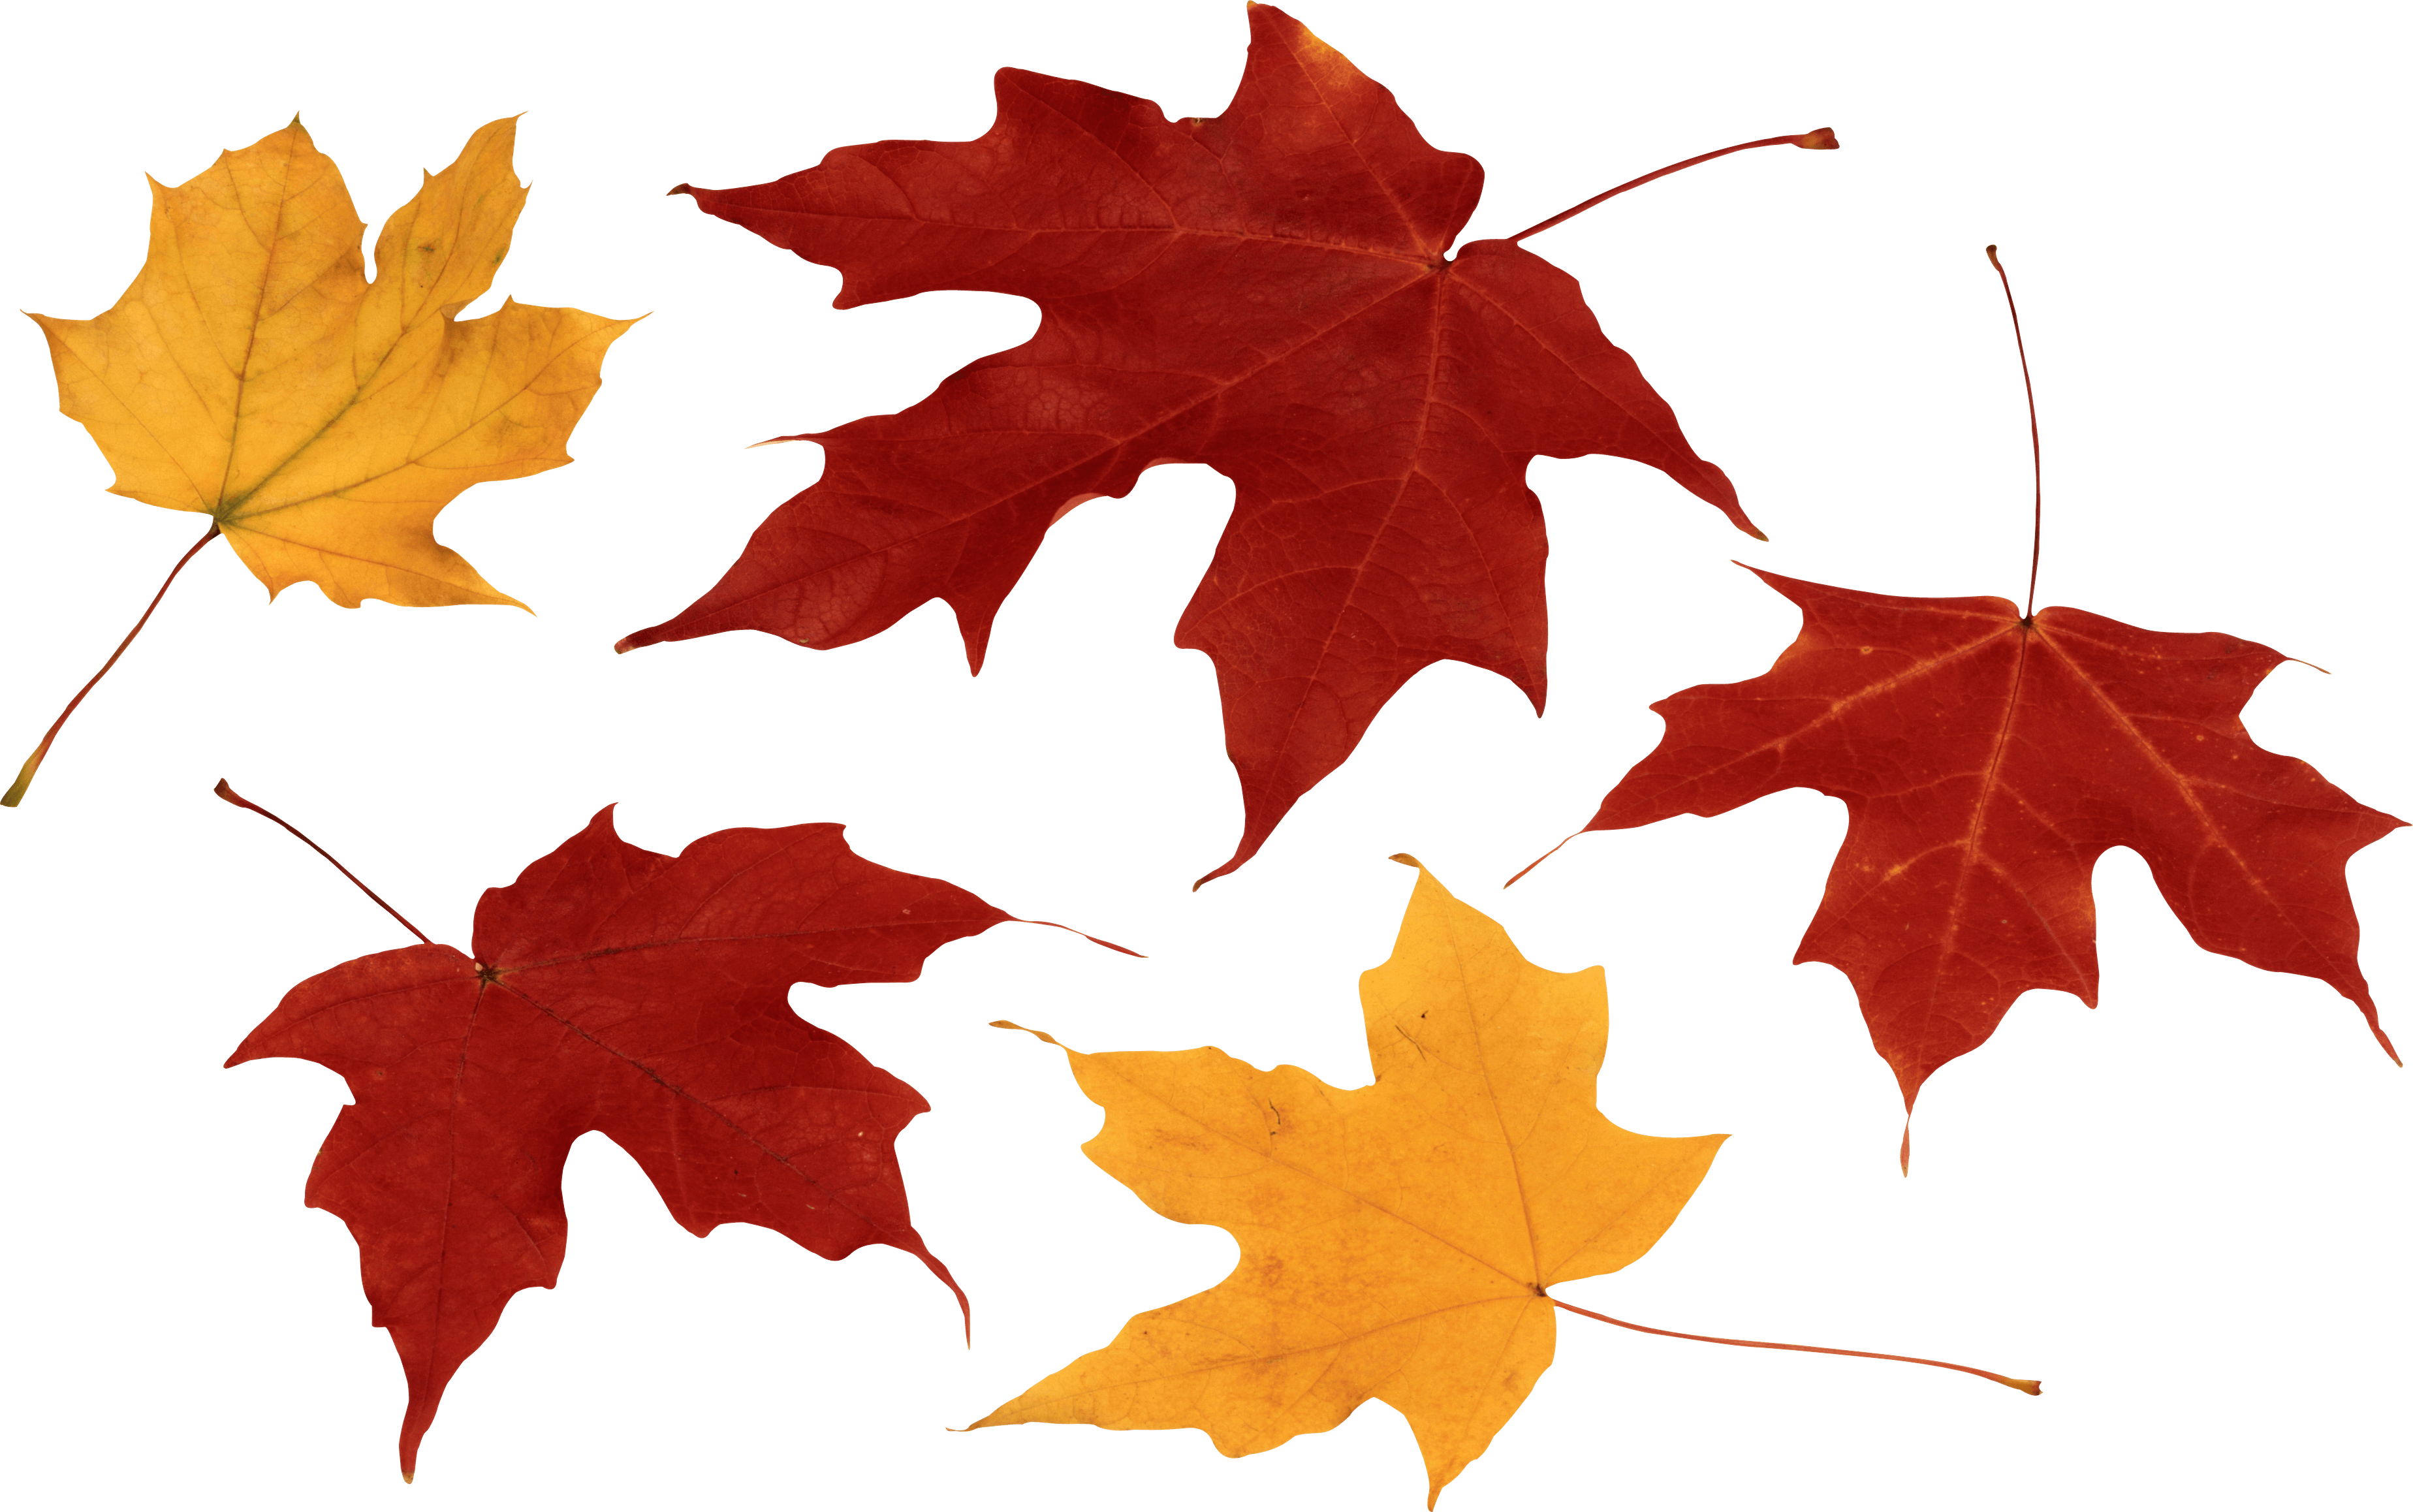 leaves clipart colorful leave